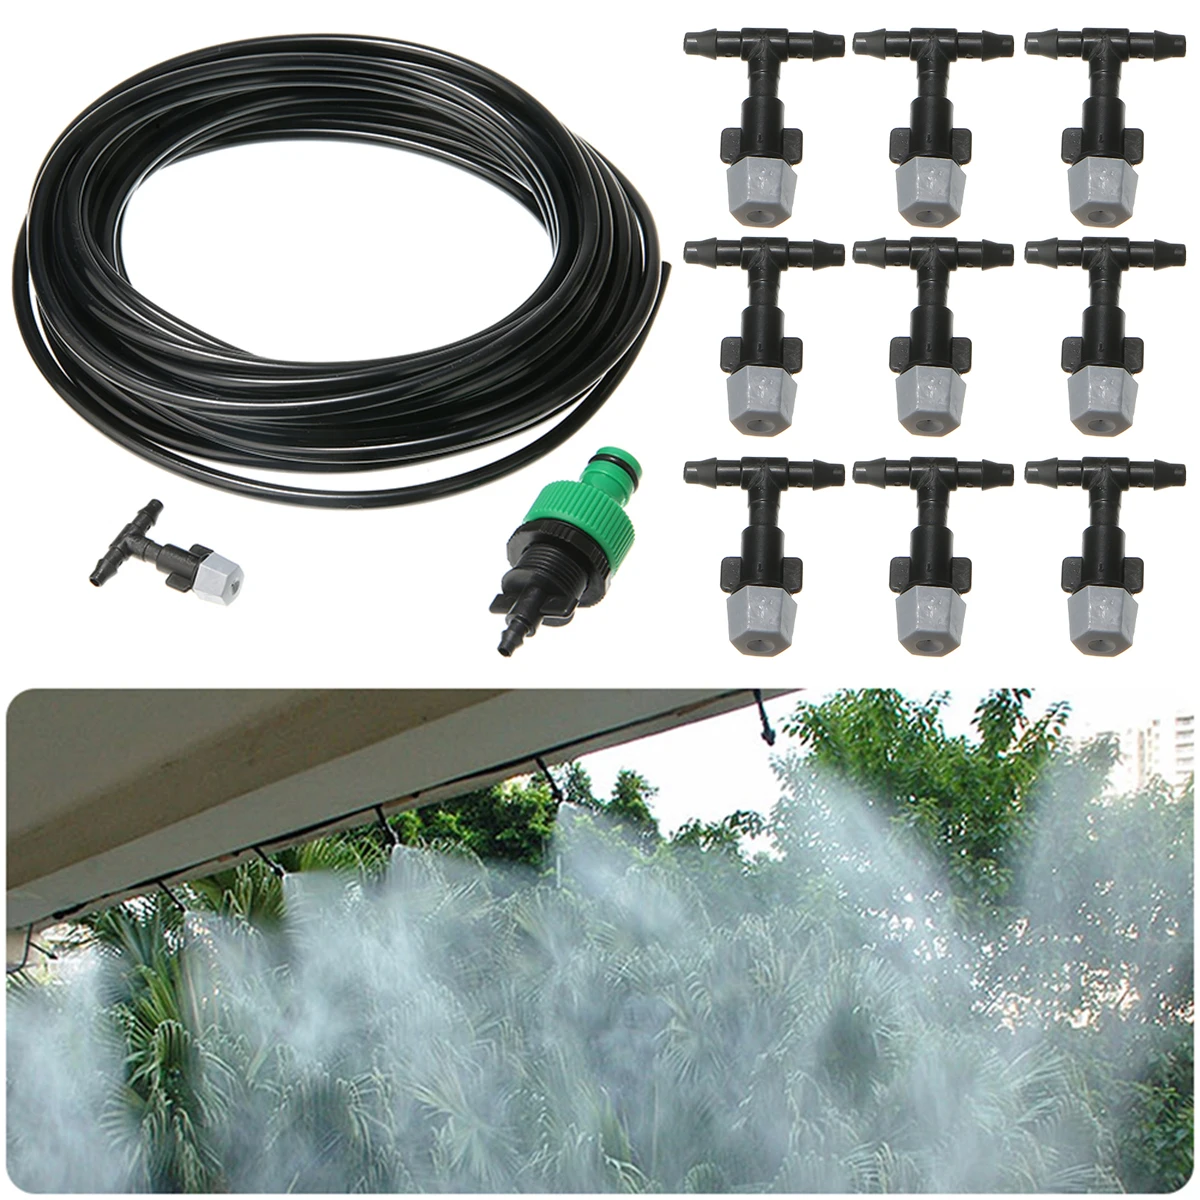 NUZAMAS 20M Watering System Outdoor Misting Cooling Sprinkler Spray Nozzles, 